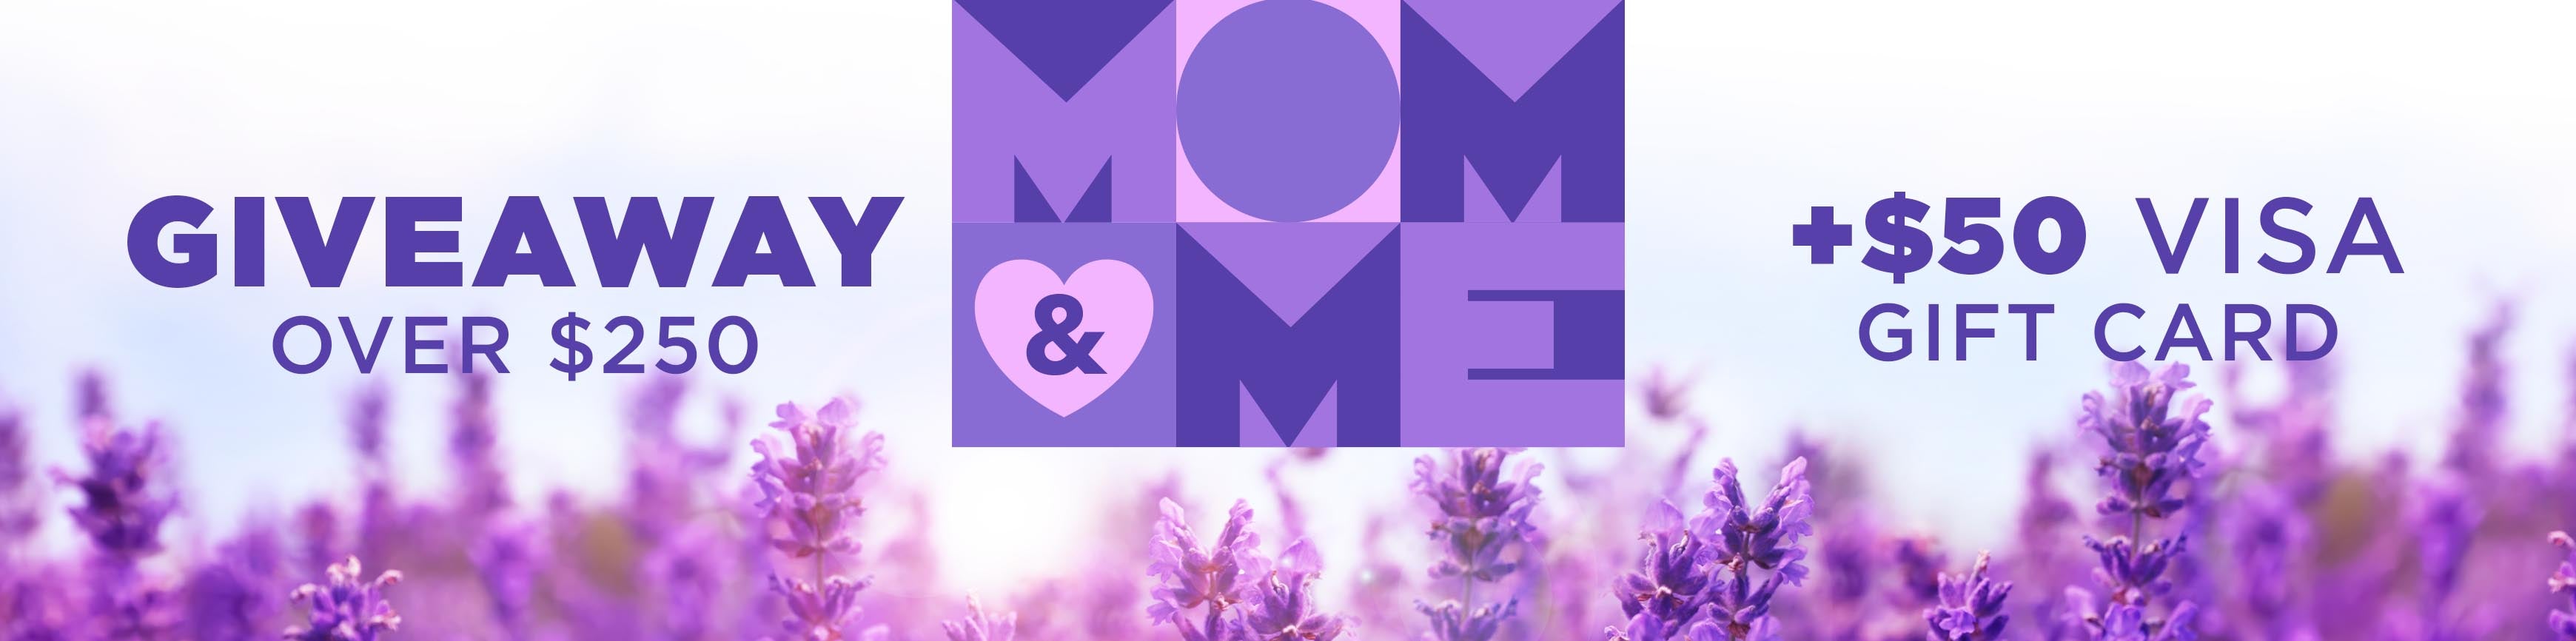 mom and me Giveaway banner